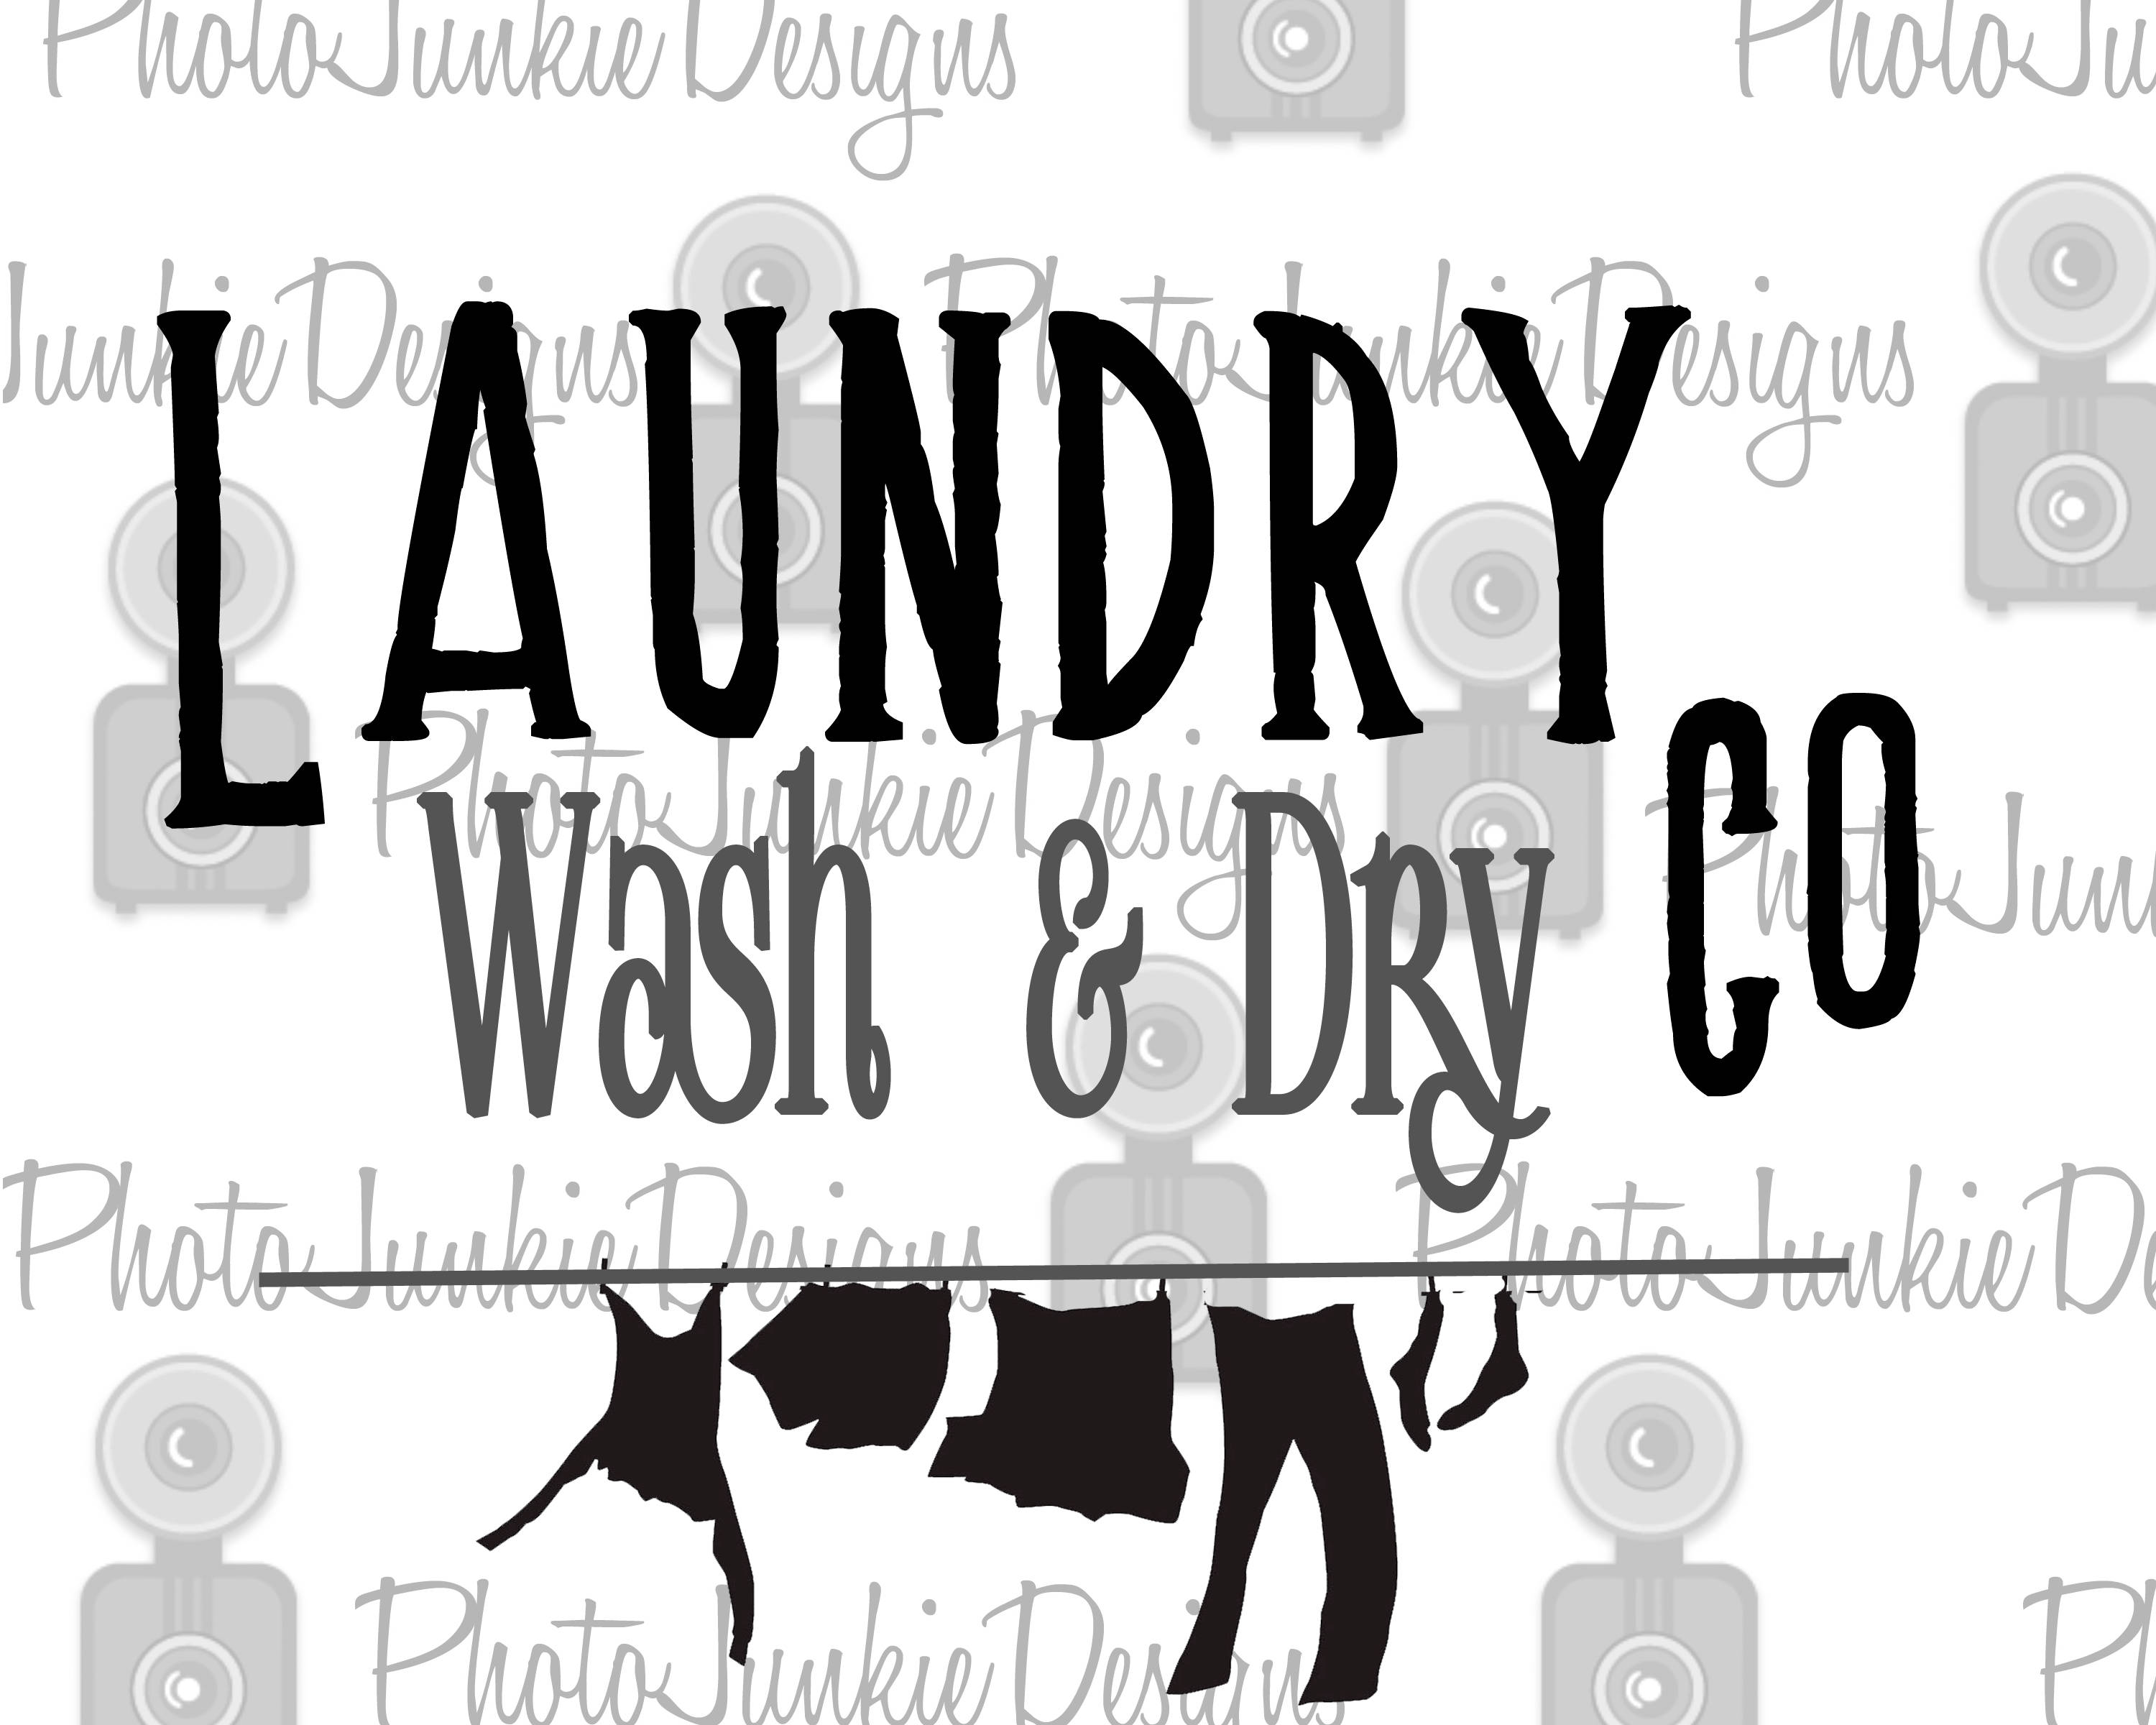 SVG Cutting Laundry Co SVG PNG and Jpeg files